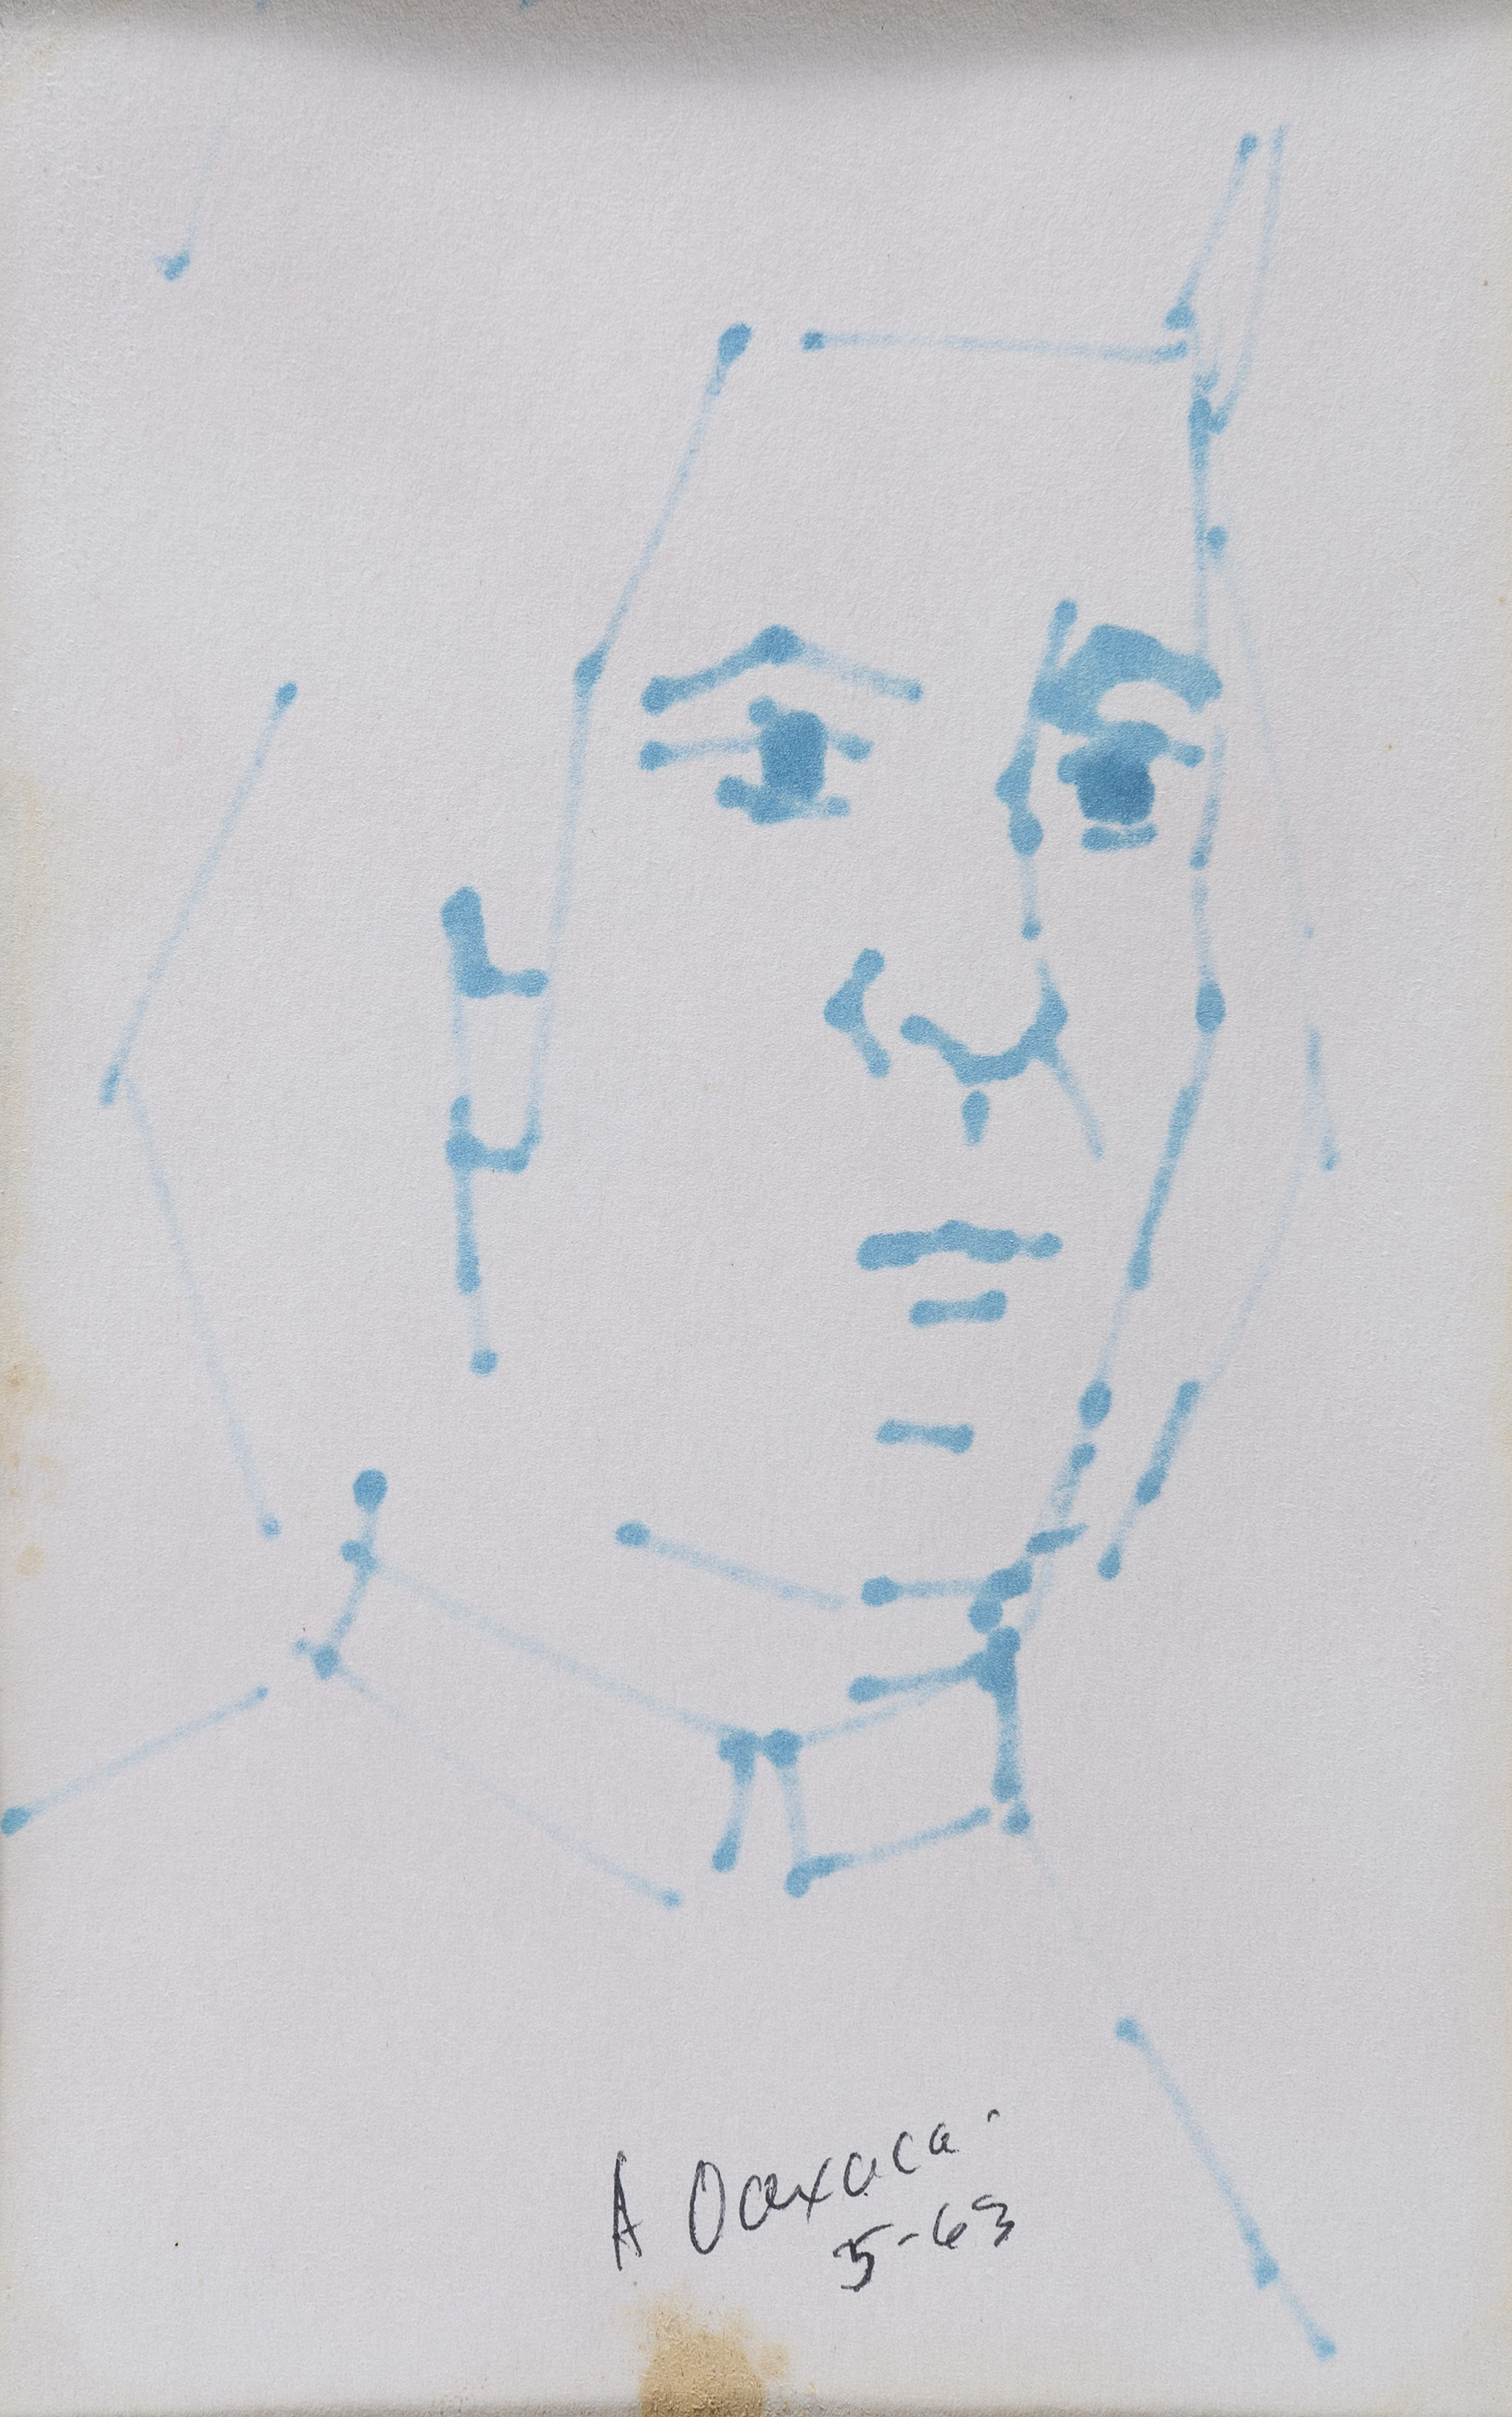 PAIR OF FELT PEN PORTRAITS BY ANTHONY QUINN 1963 - Image 2 of 2